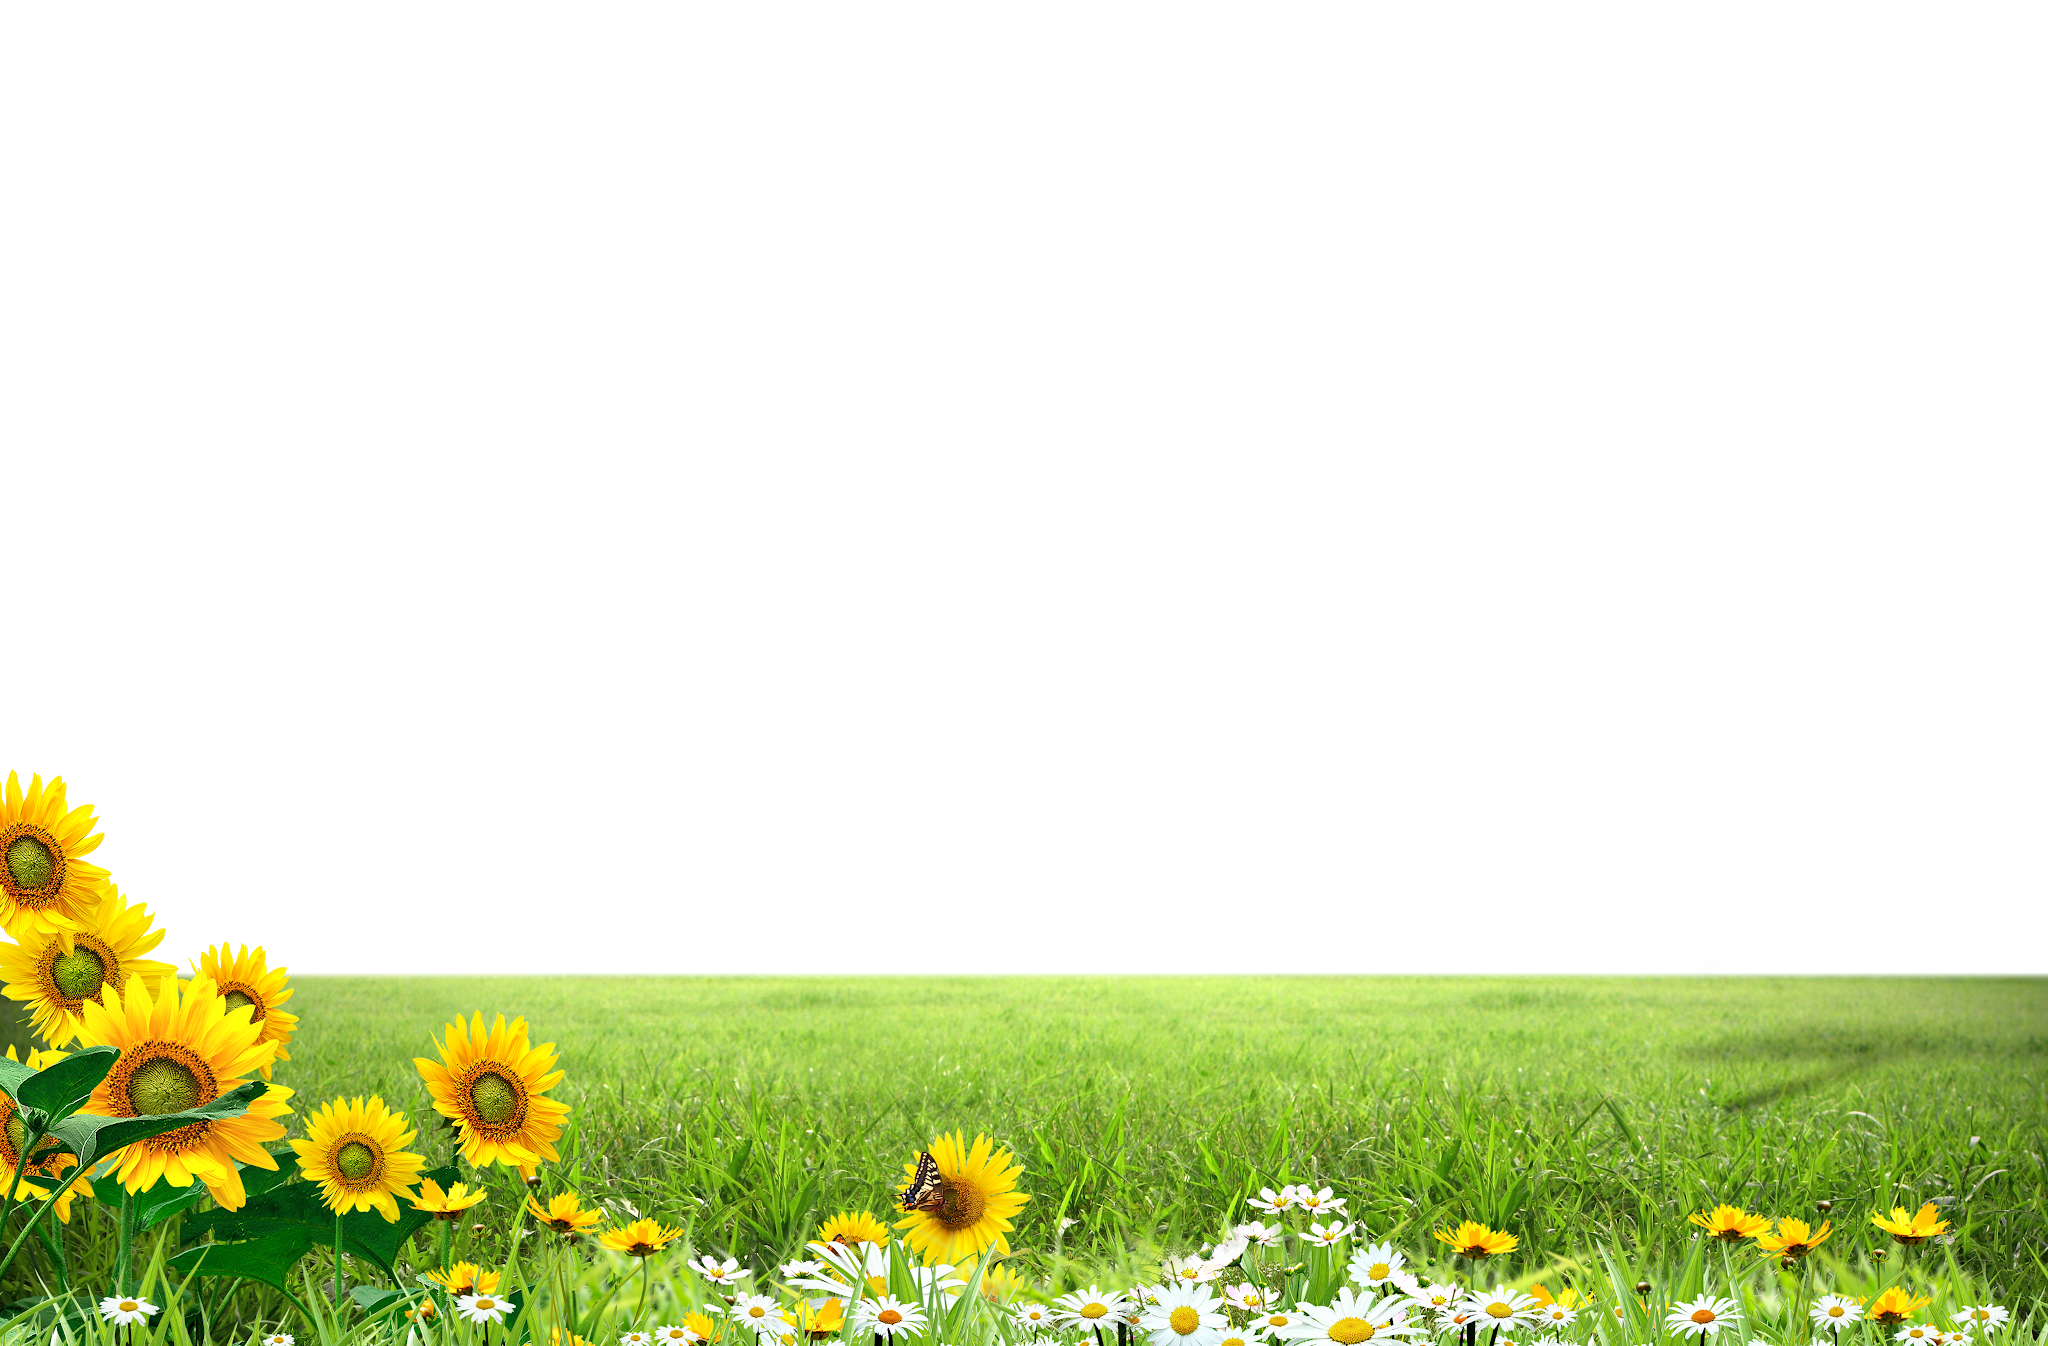 Meadow Greenscape PNG Transparent Image